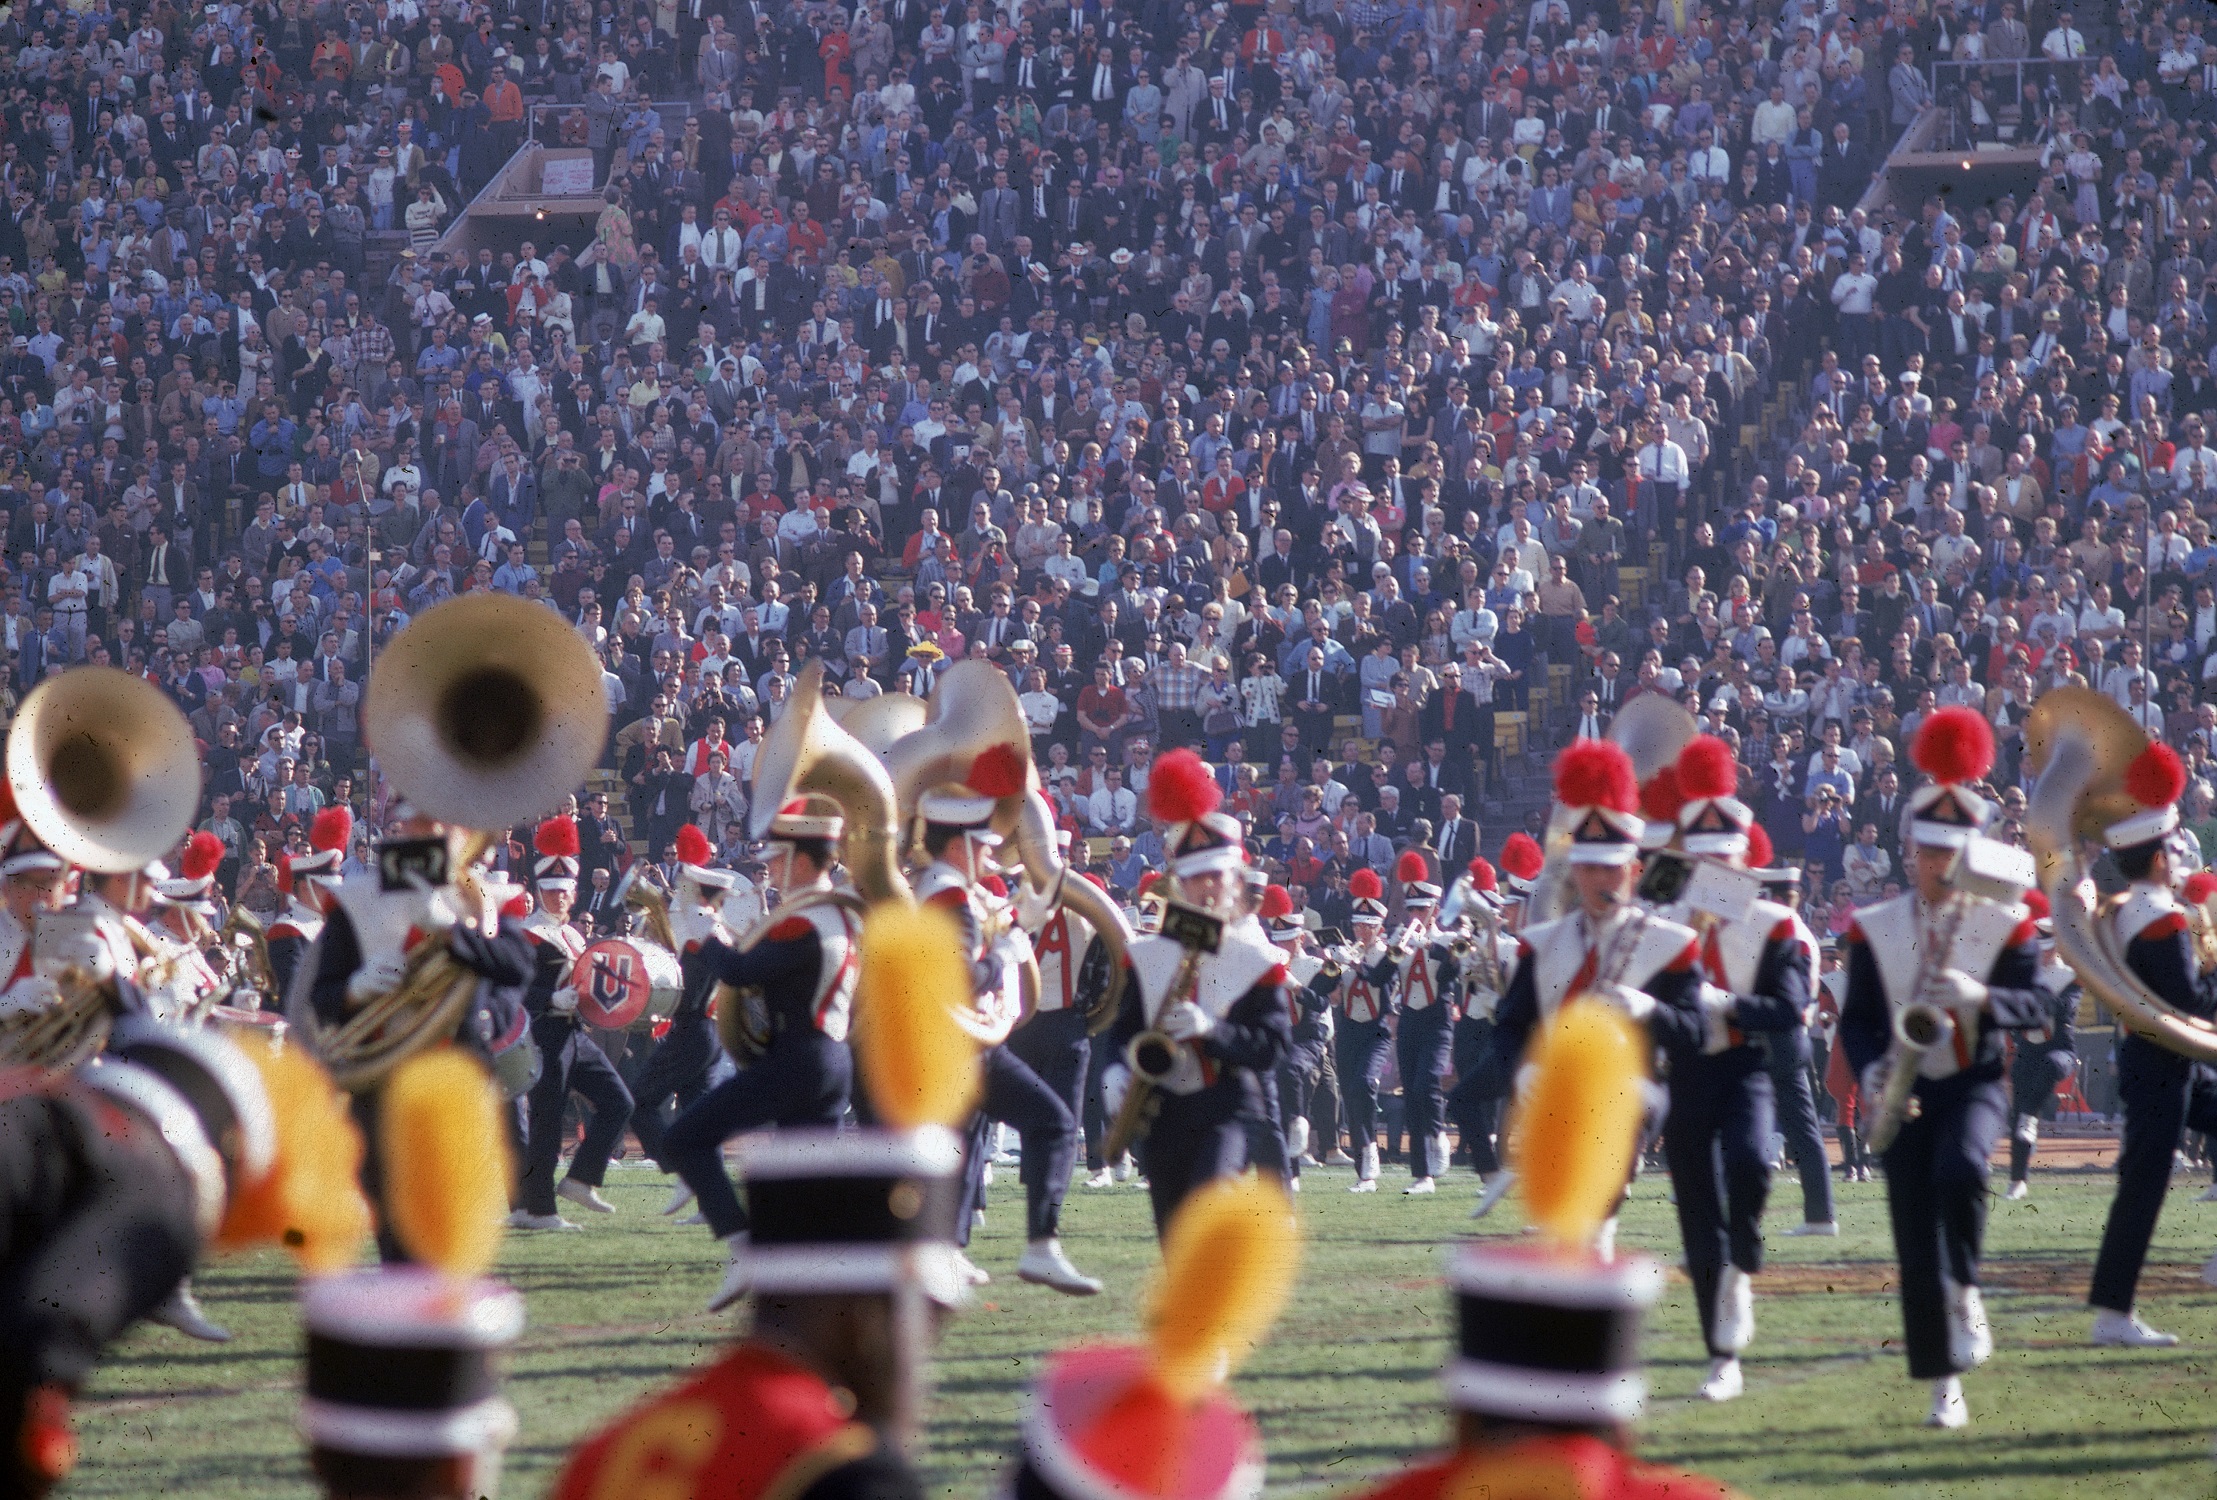 Members of the University of Arizona marching band perform on the field during the halftime show at Super Bowl I